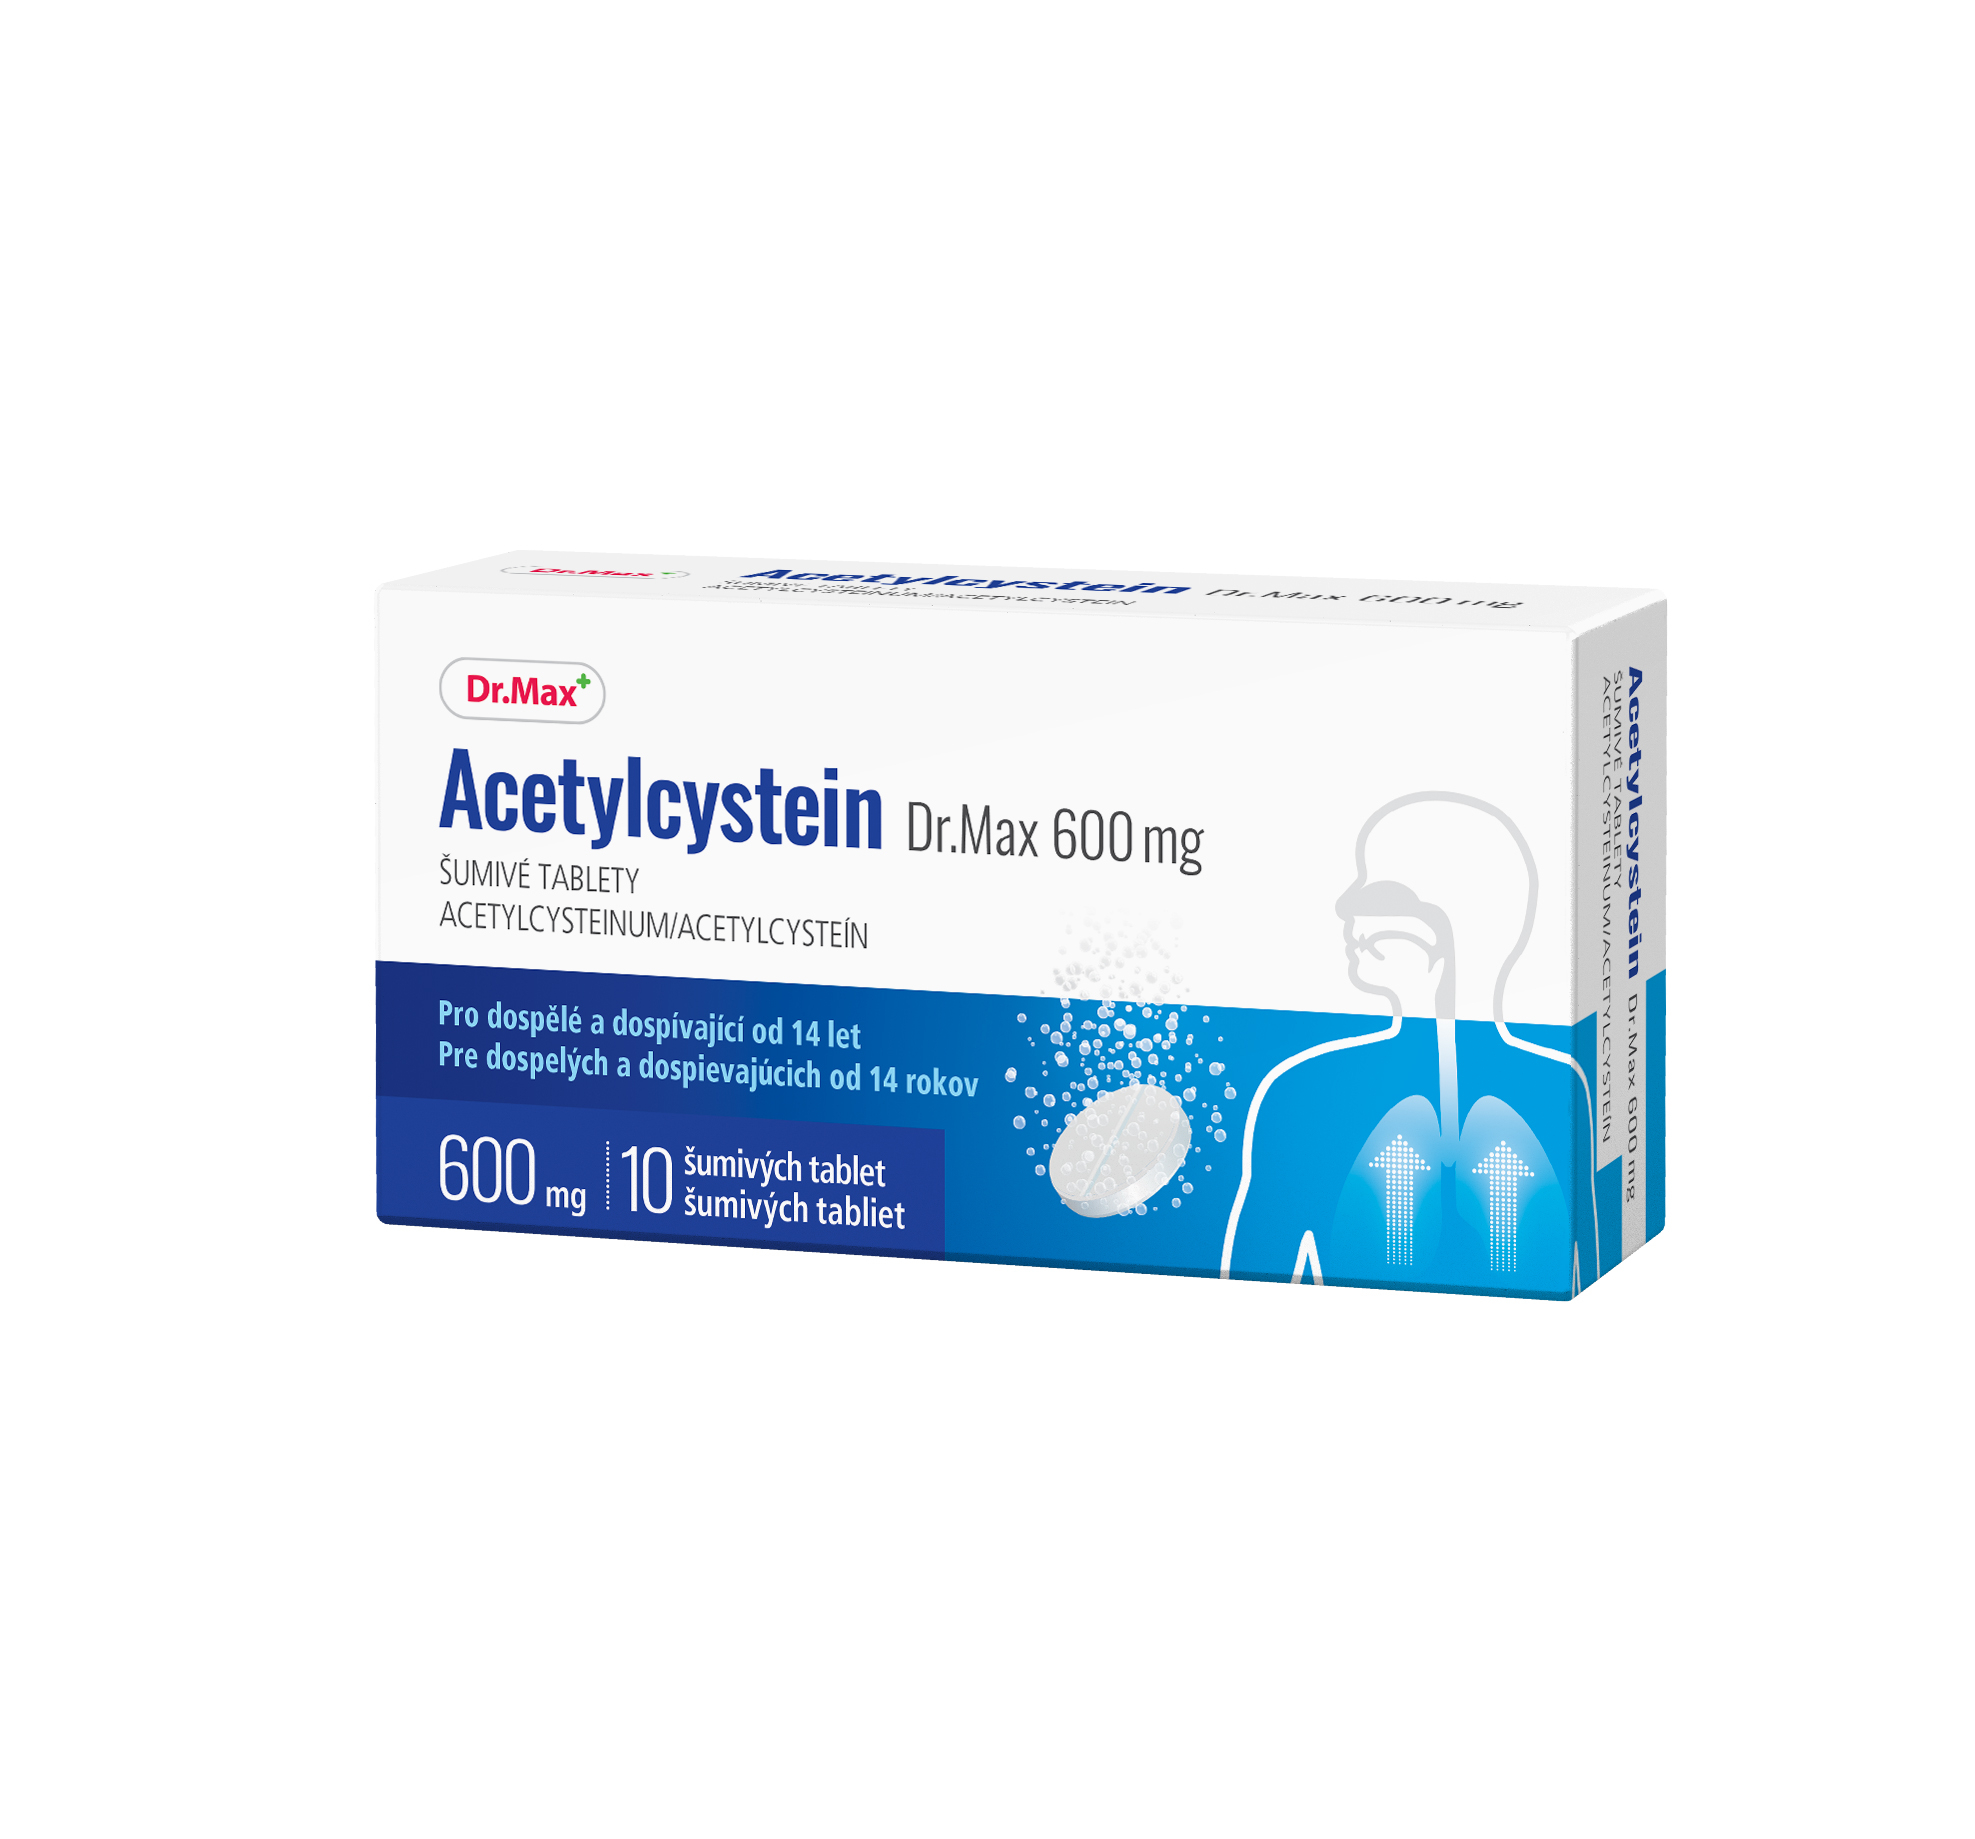 Dr.Max Acetylcystein 600 mg 10 šumivých tablet Dr.Max